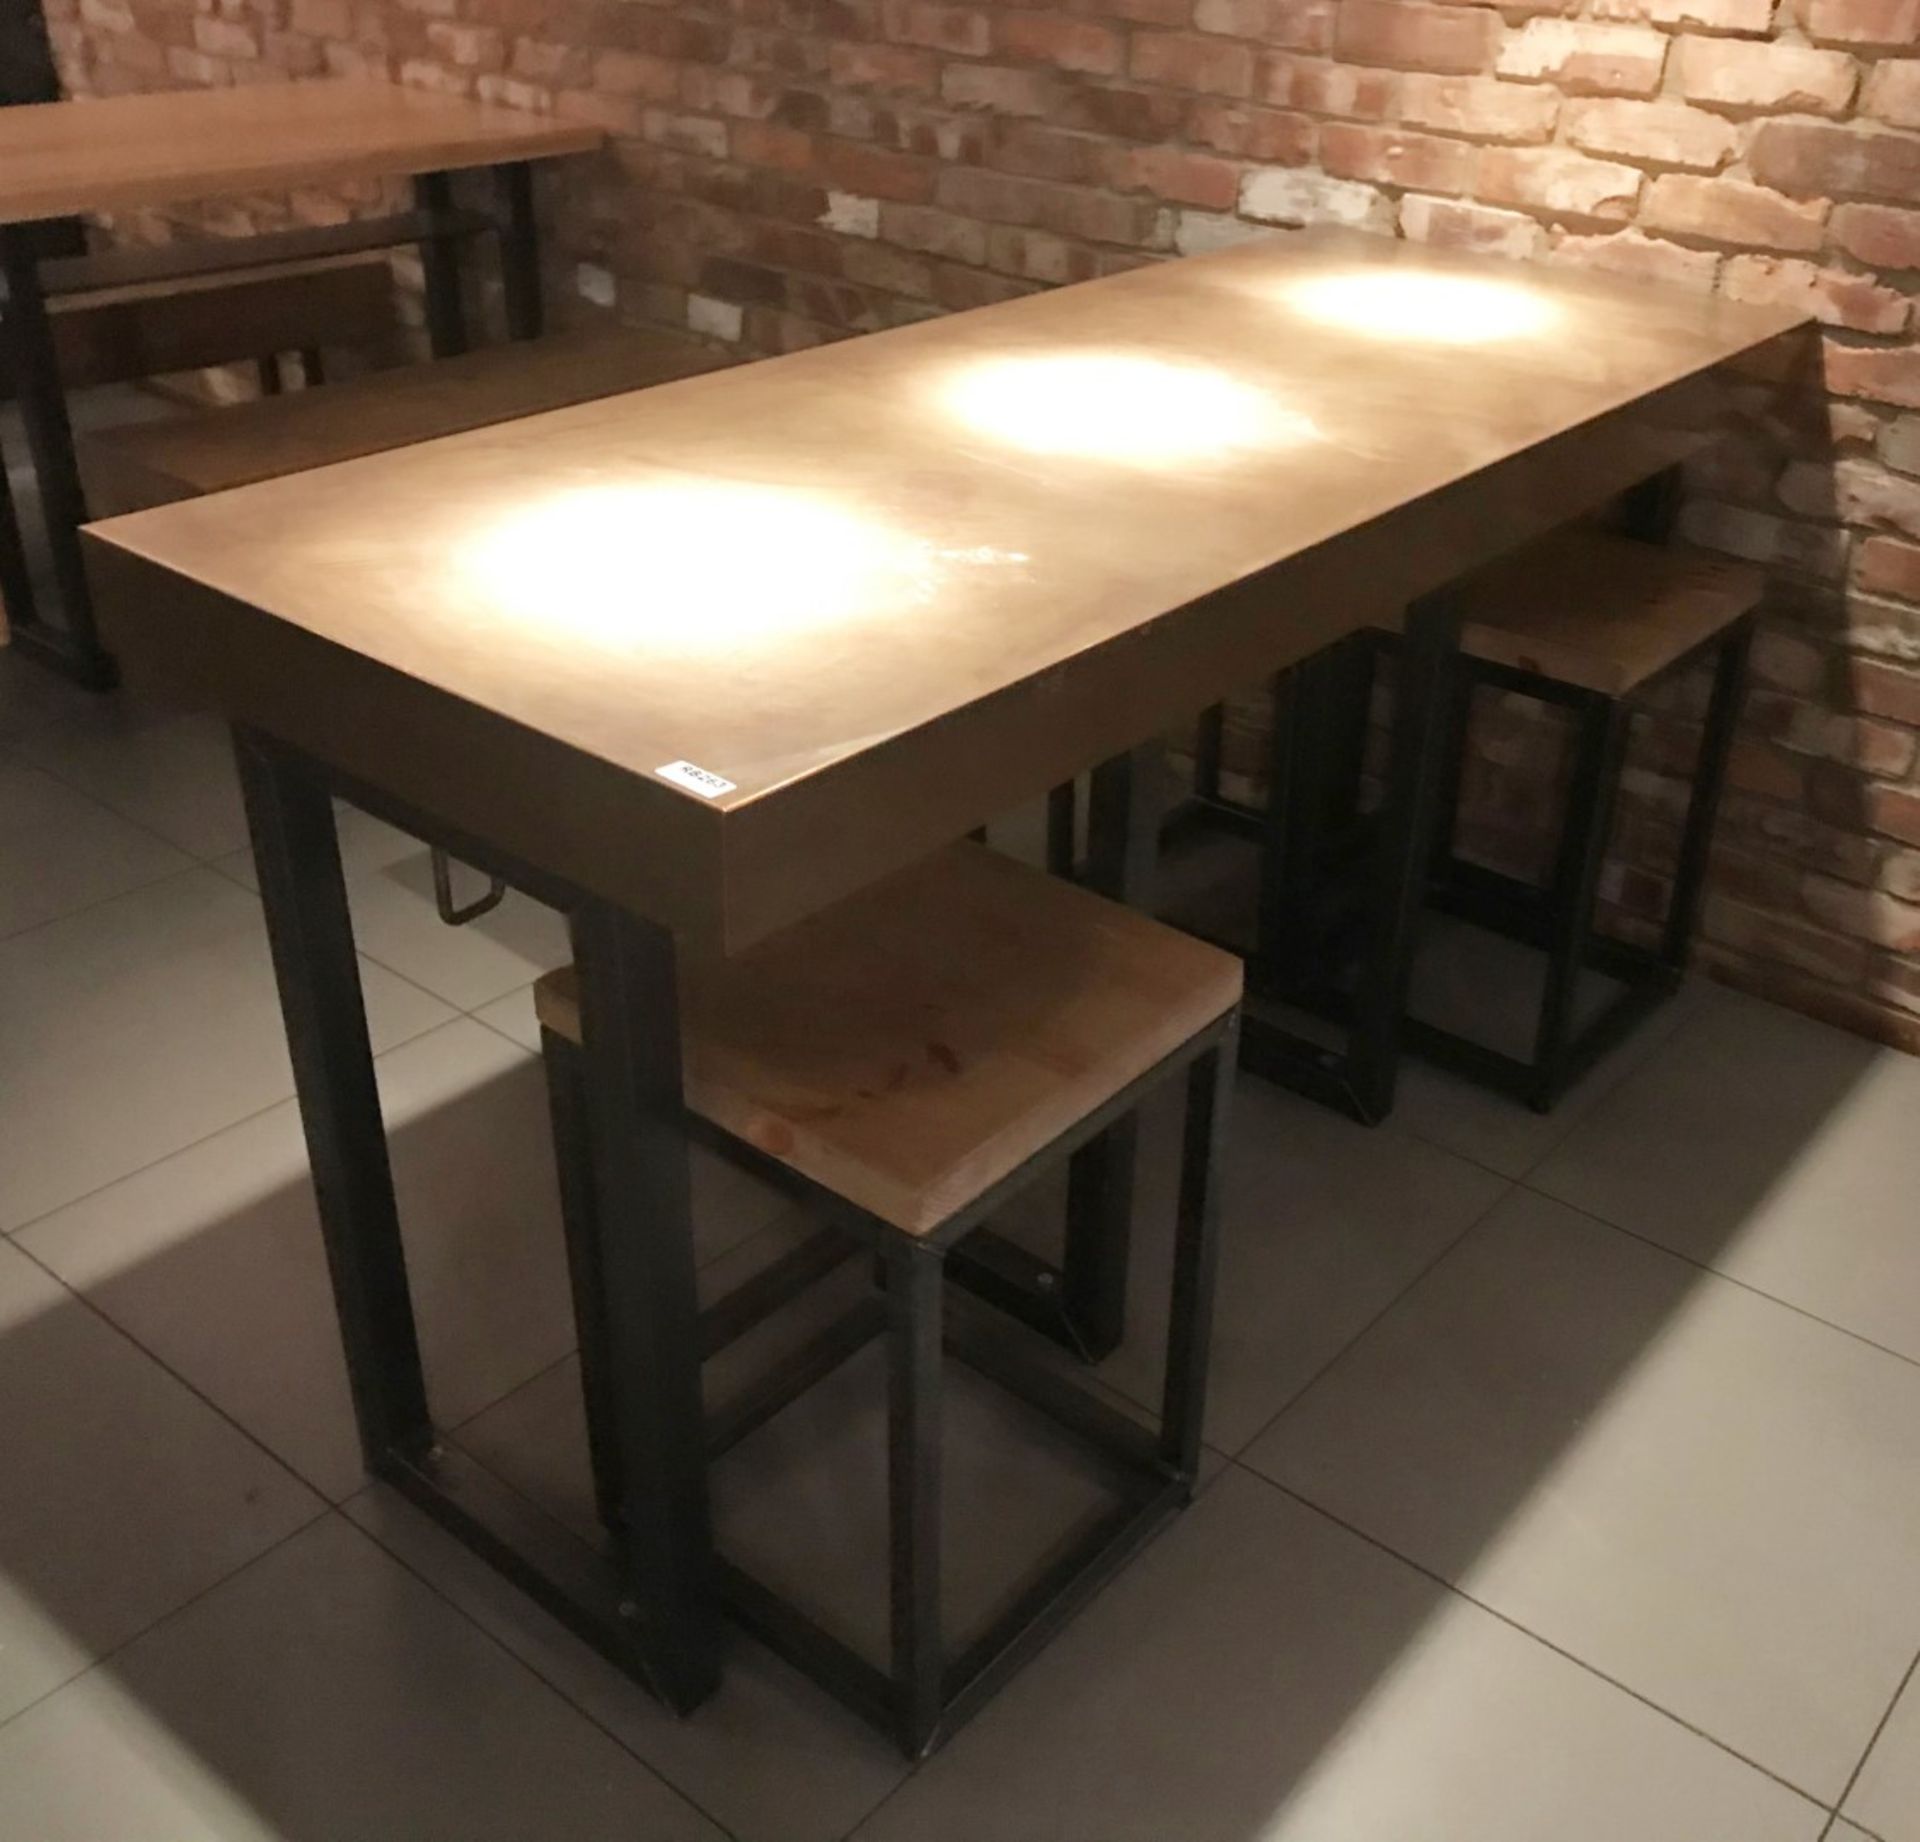 1 x Restaurant Dining Table With Industrial Metal Base and Copper Top - Size H91 x W180 x D70 cms -